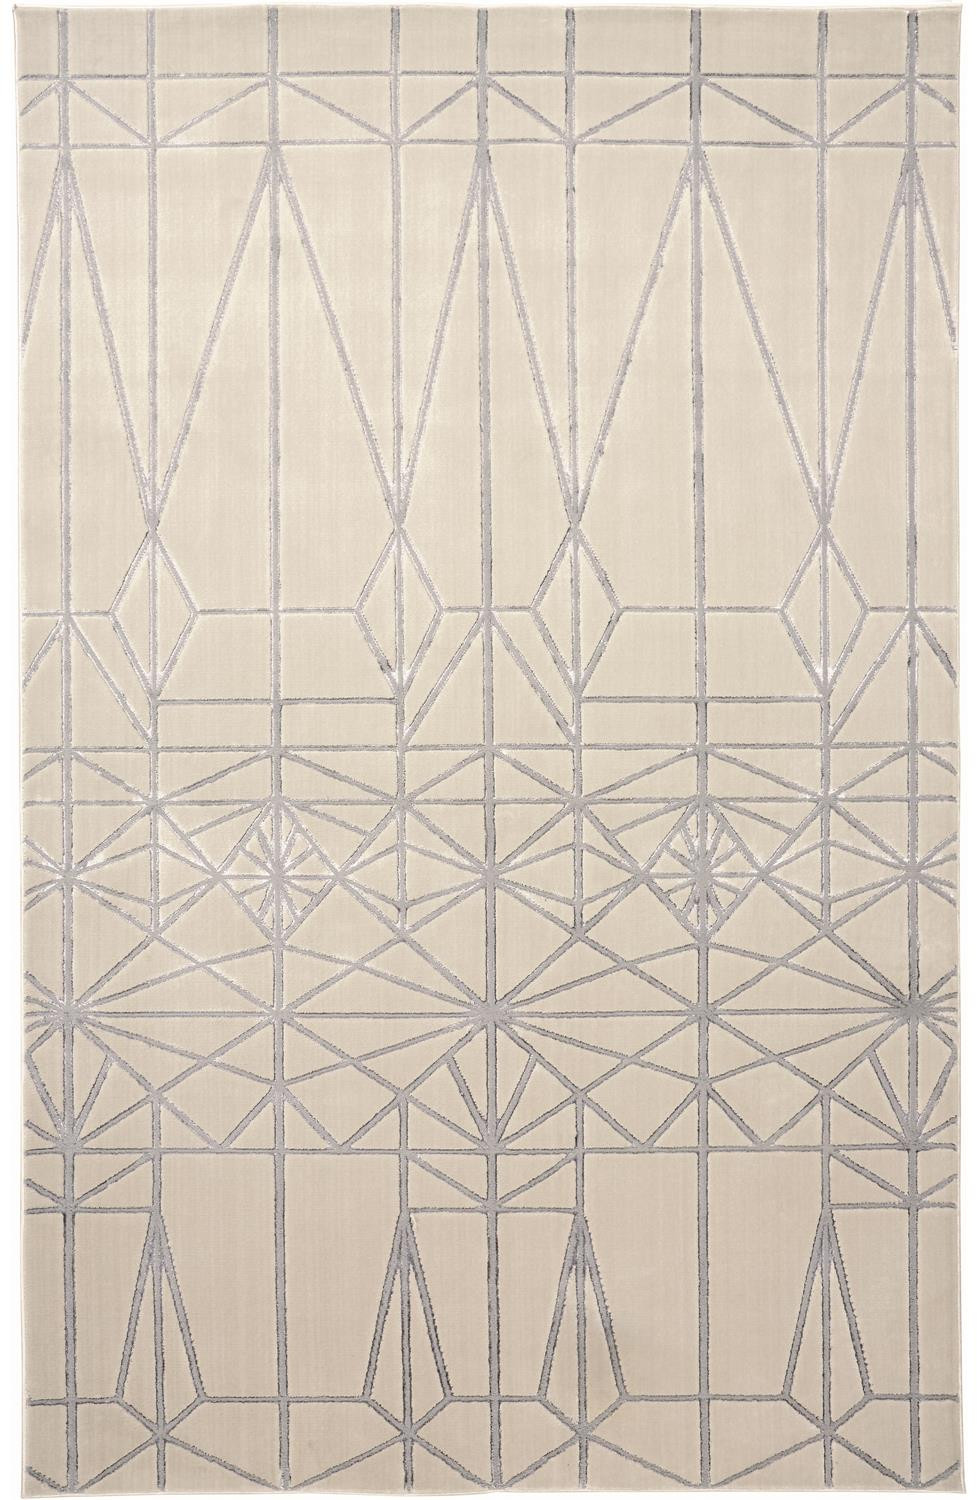 5' X 8' White Silver And Gray Geometric Stain Resistant Area Rug-511476-1